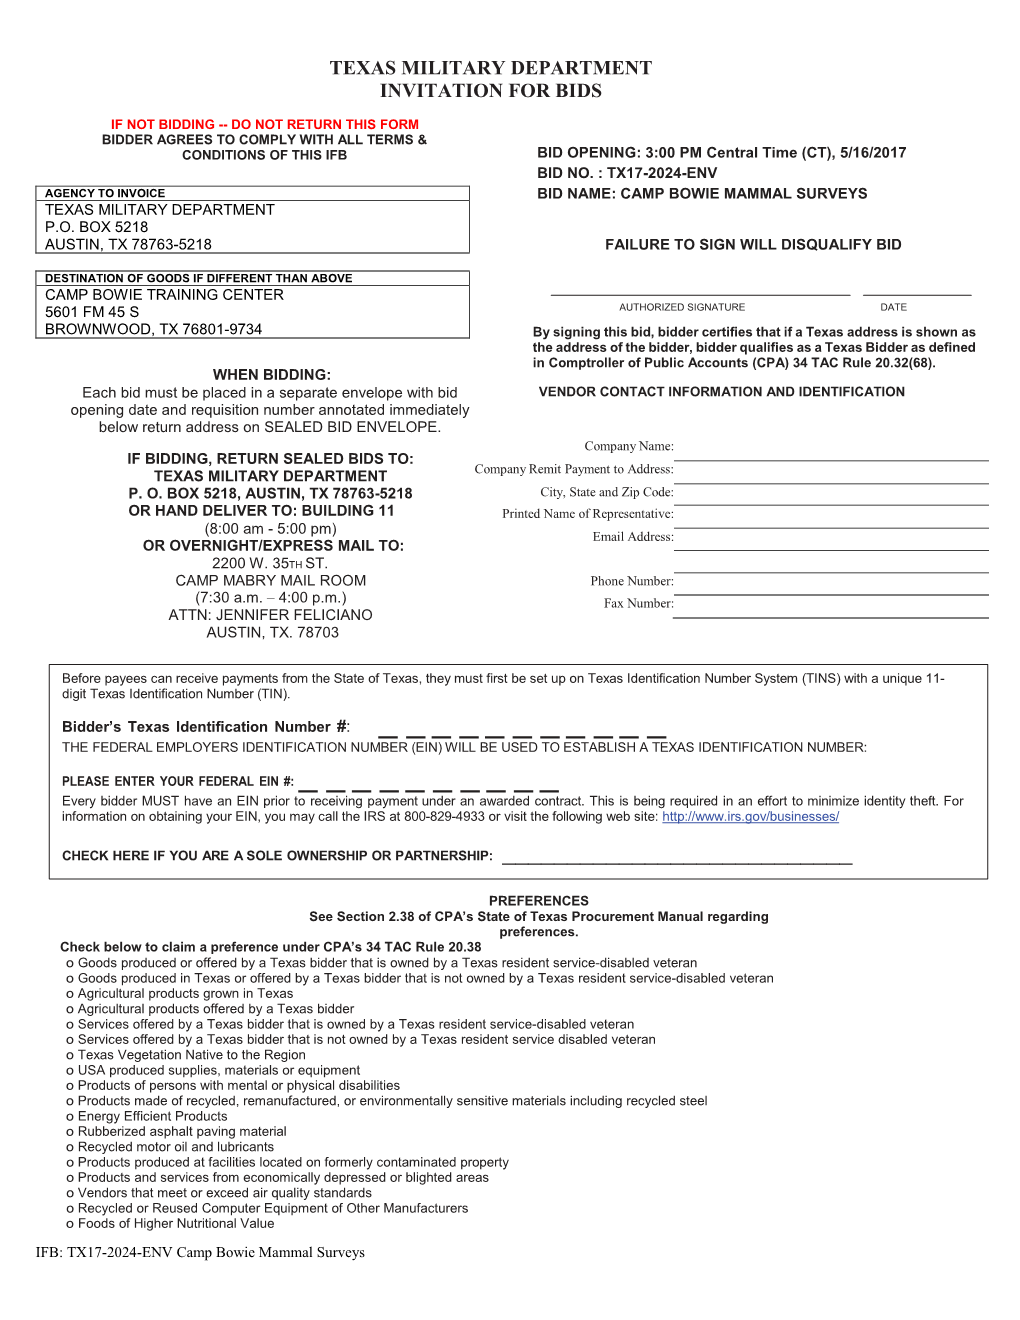 Texas Military Department Invitation for Bids